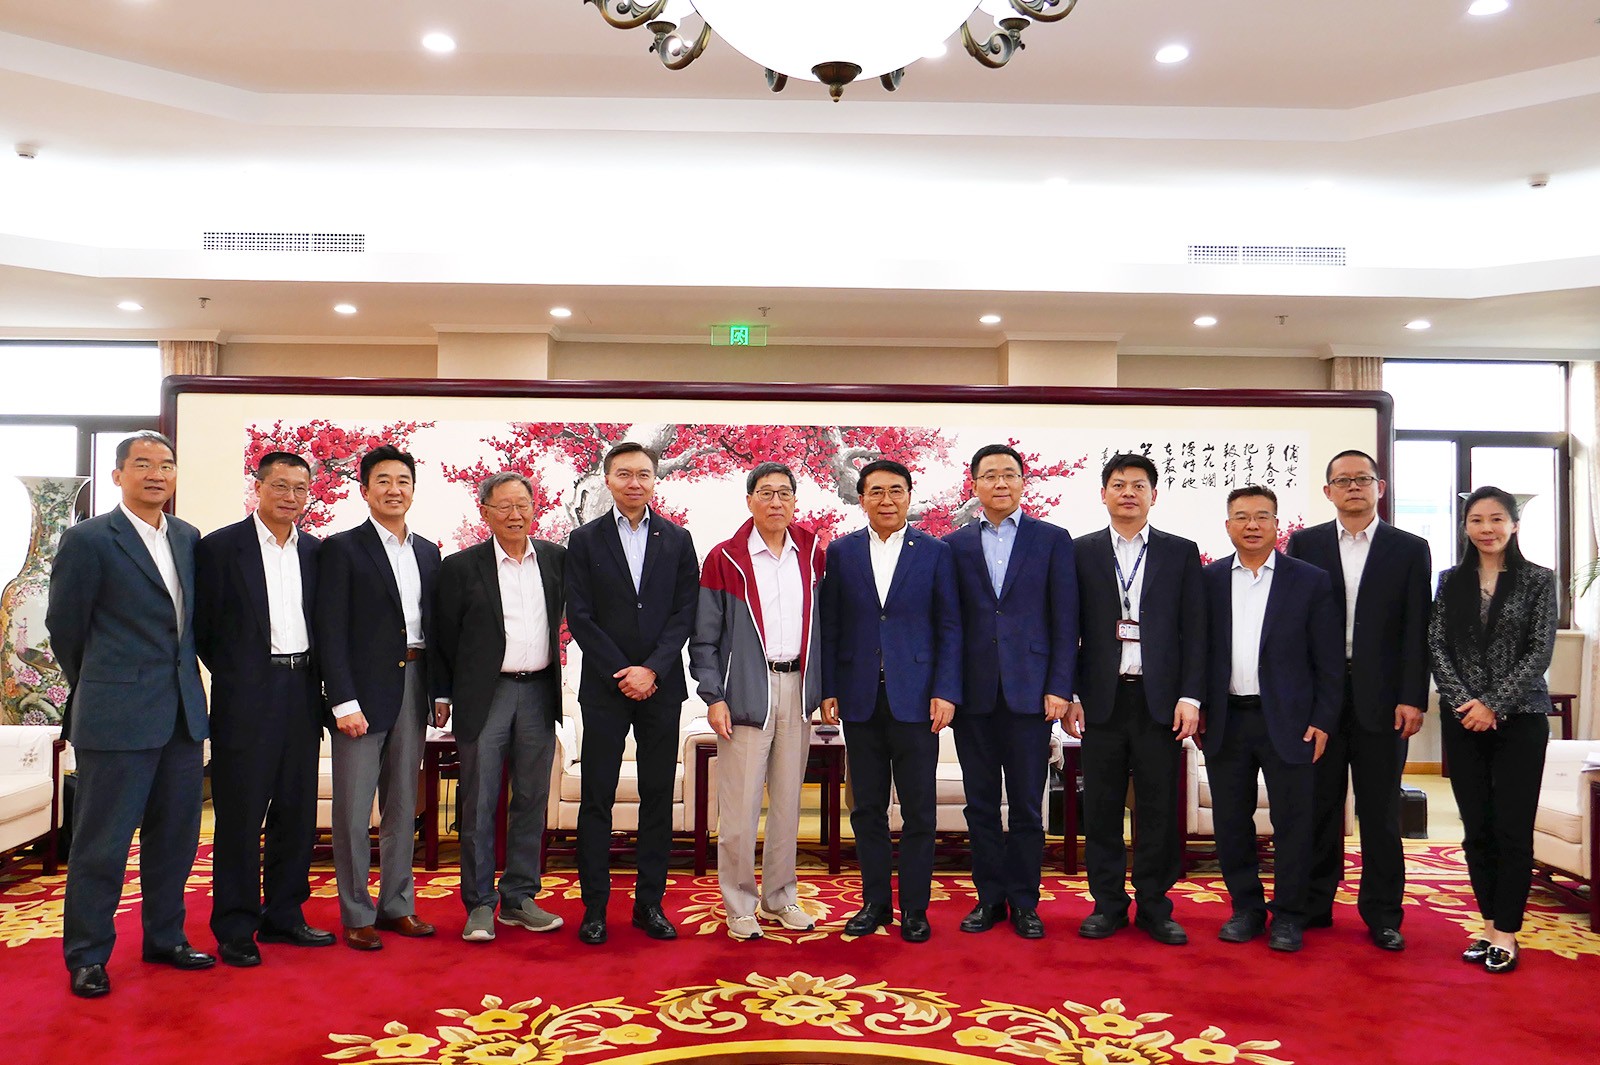 President Kuo (6th from left) and CityU delegation meet Professor Bai Chunli (6th from right), President of the Chinese Academy of Sciences (CAS), and other CAS representatives.